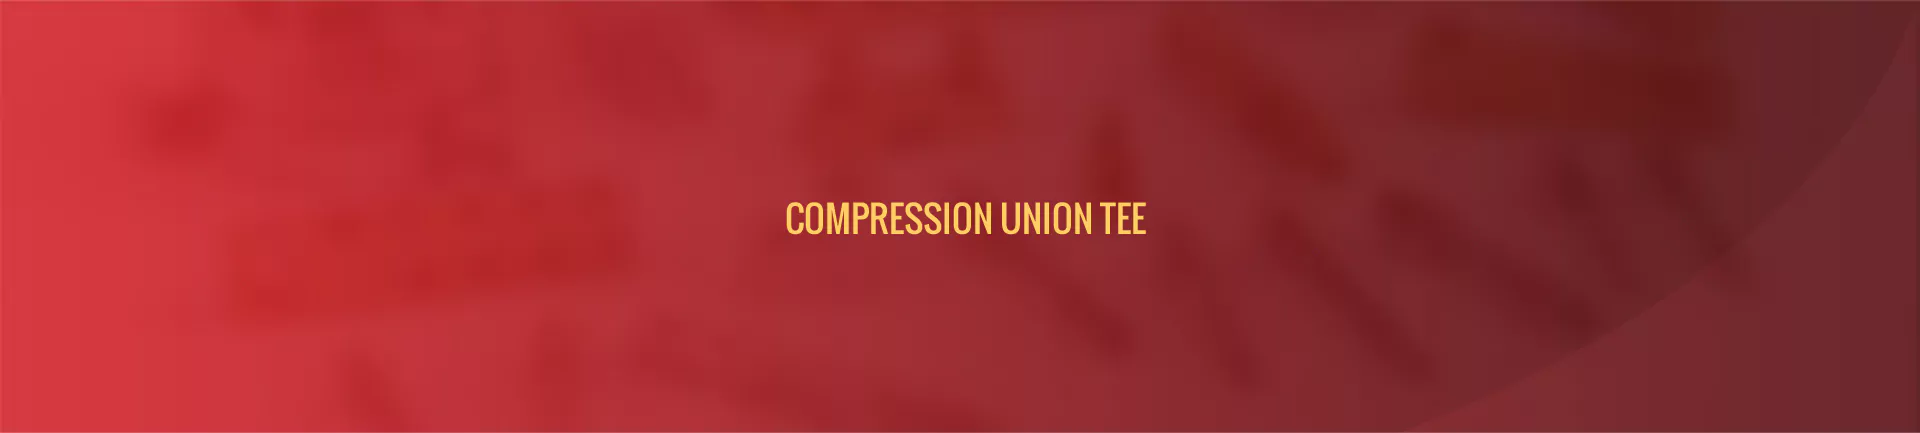 compression-union-tee-banner